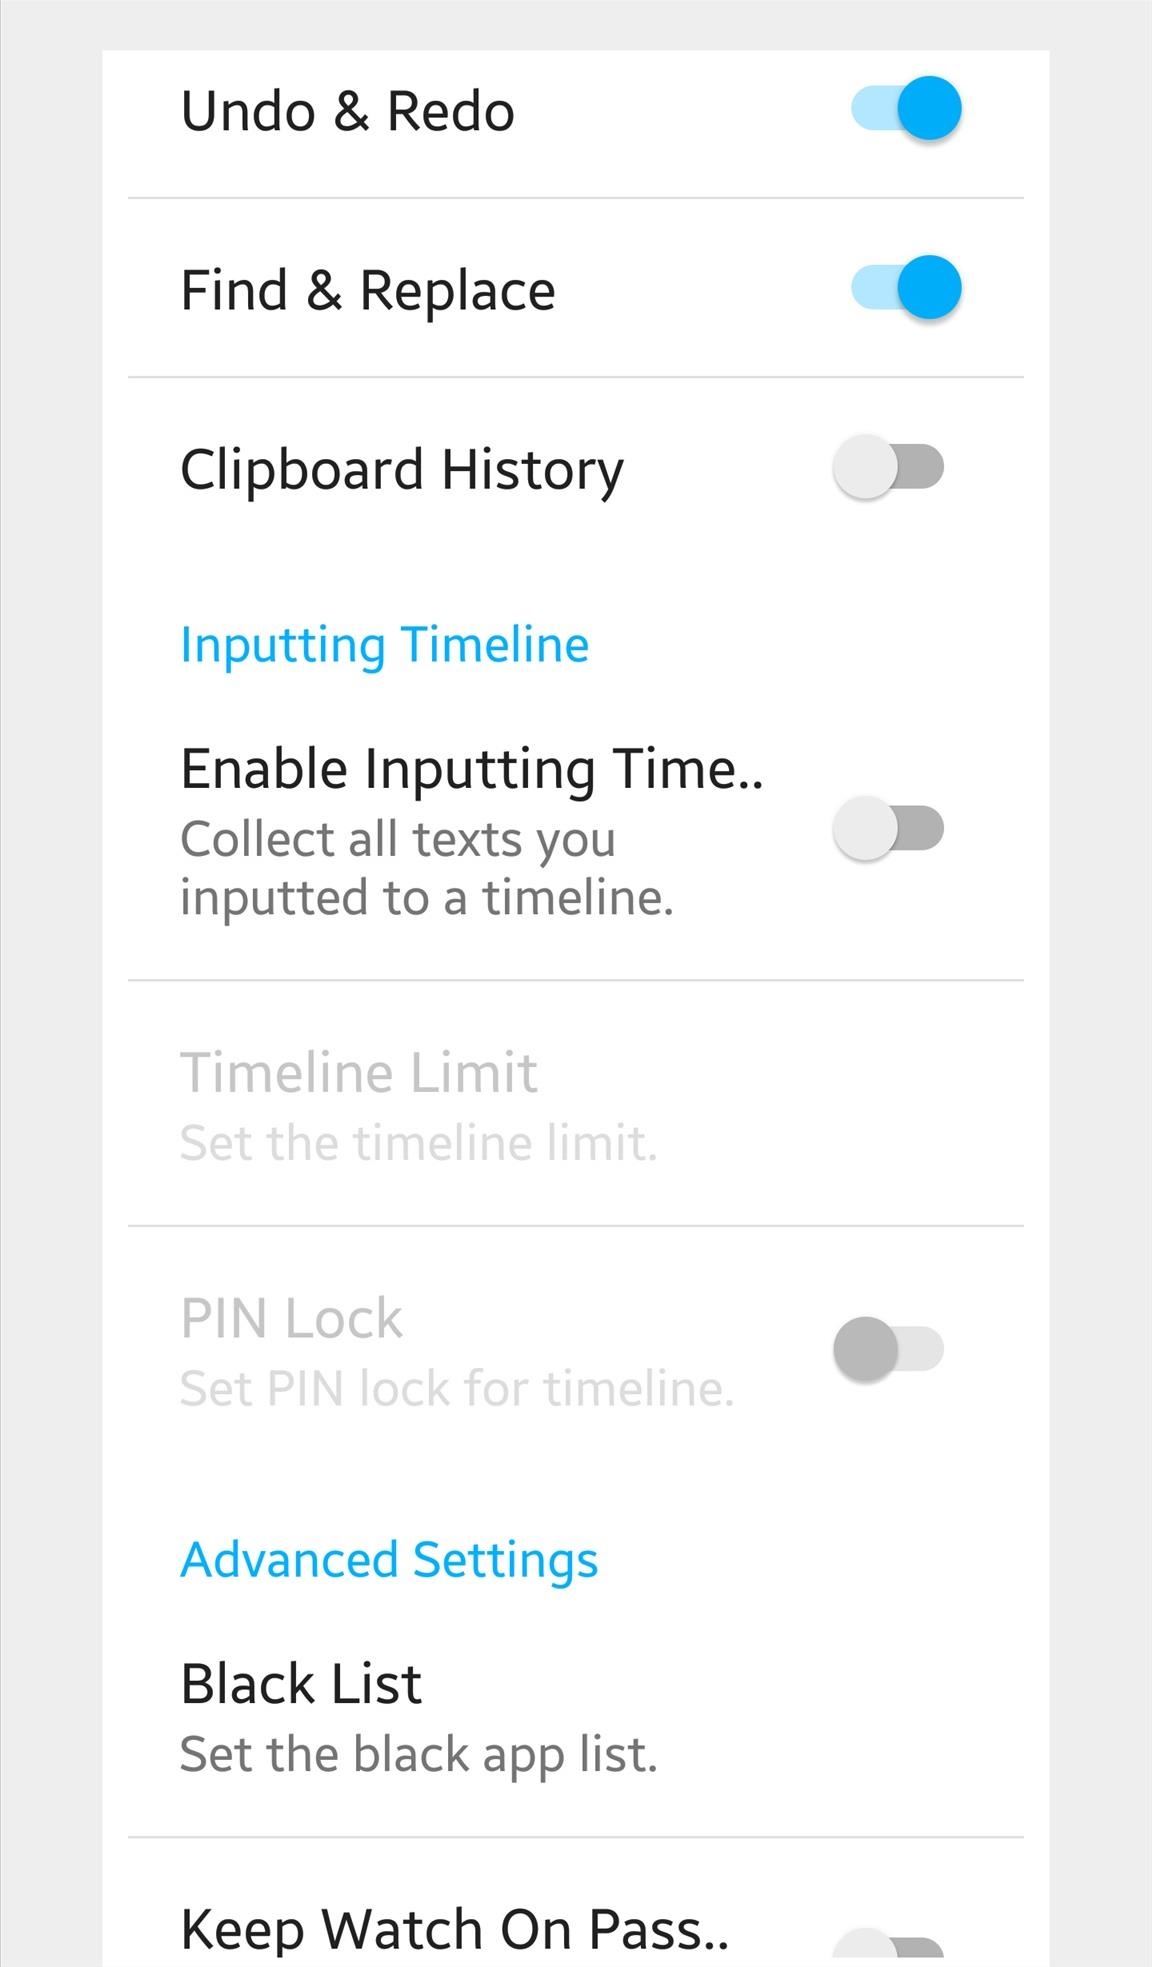 Global Find & Replace, Undo, & Redo Finally Comes to Android